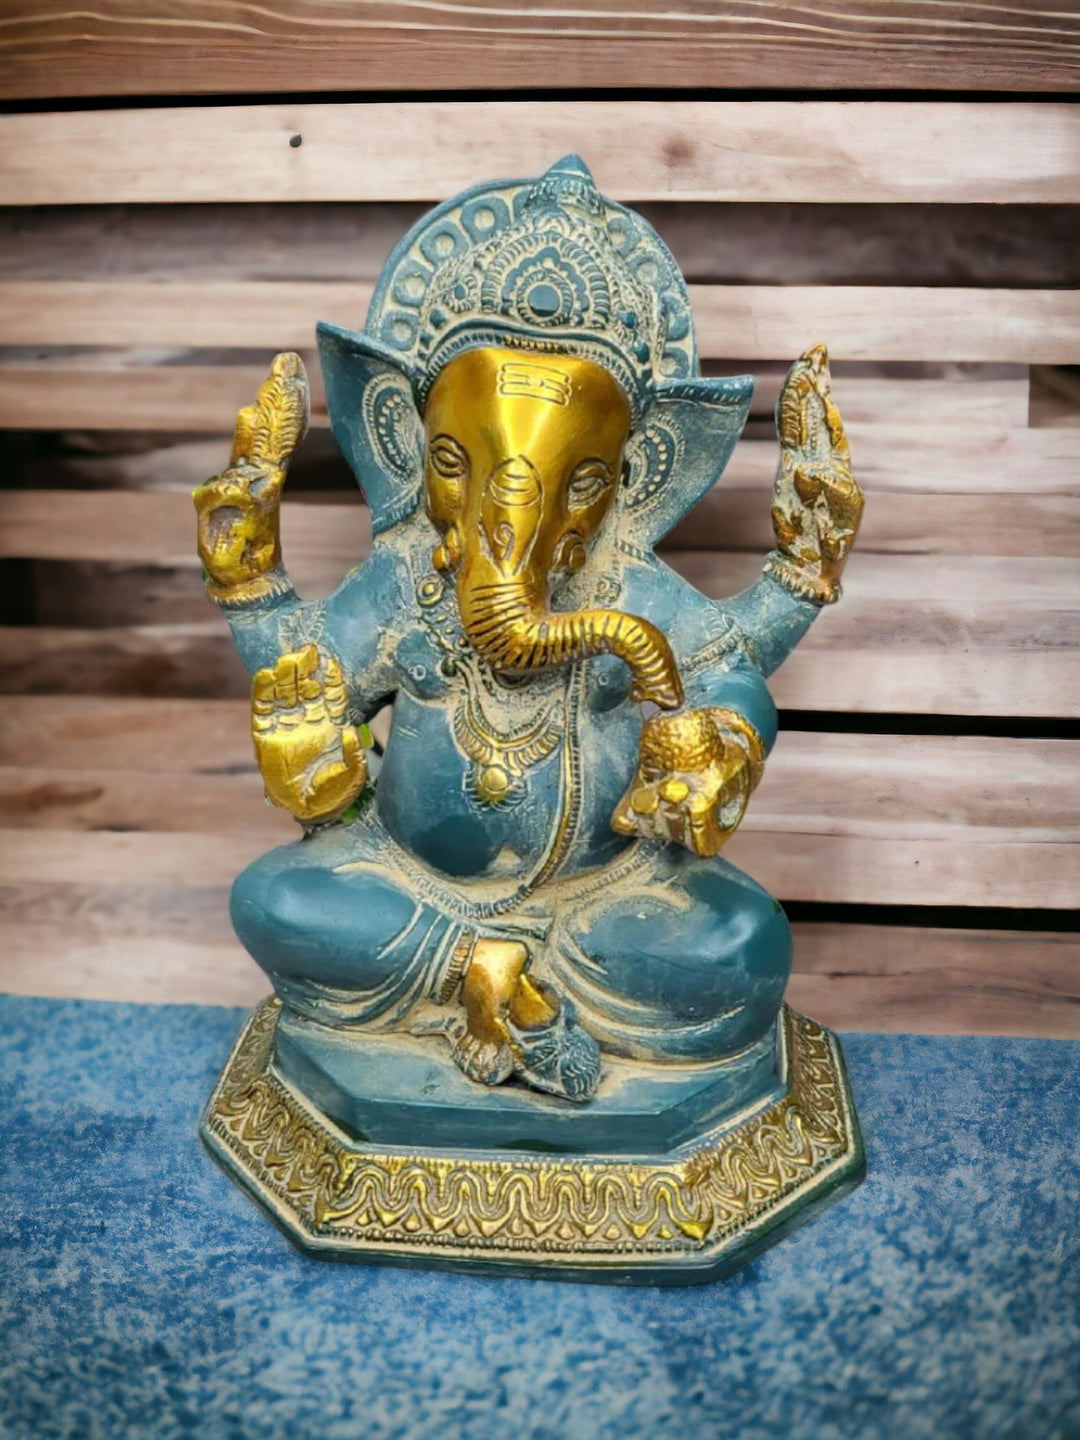 Tamas Brass Handcrafted Lord Mangalkari Ganesh Statue / Idol With Antique Finish (6 x 5 x 7.5 Inches, Golden & Blue) (Pack of 1)